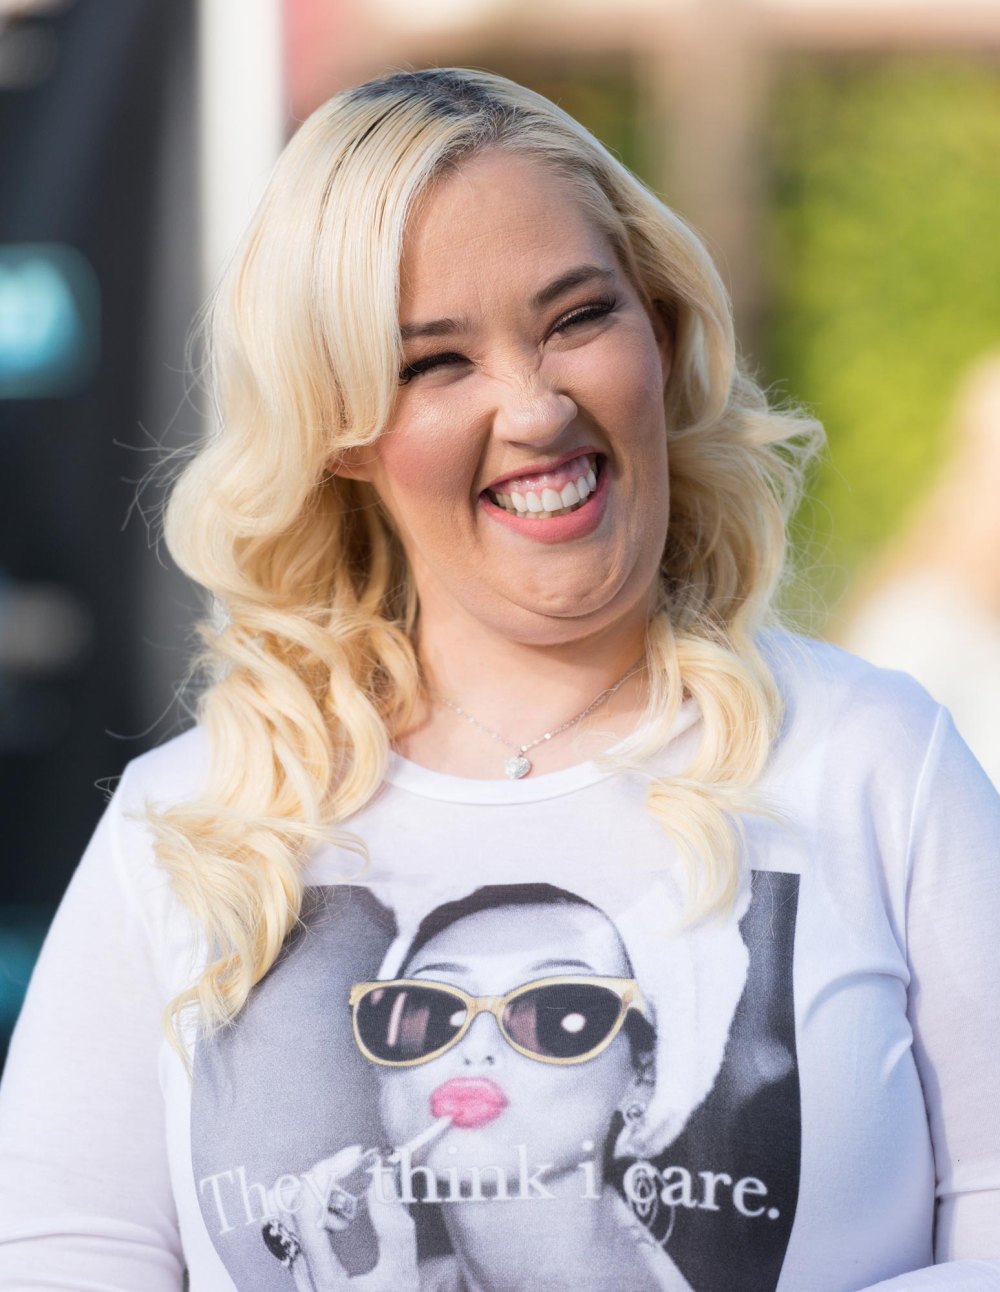 Mama June Shannon Says She Has Been Straight Sober for 3 Years